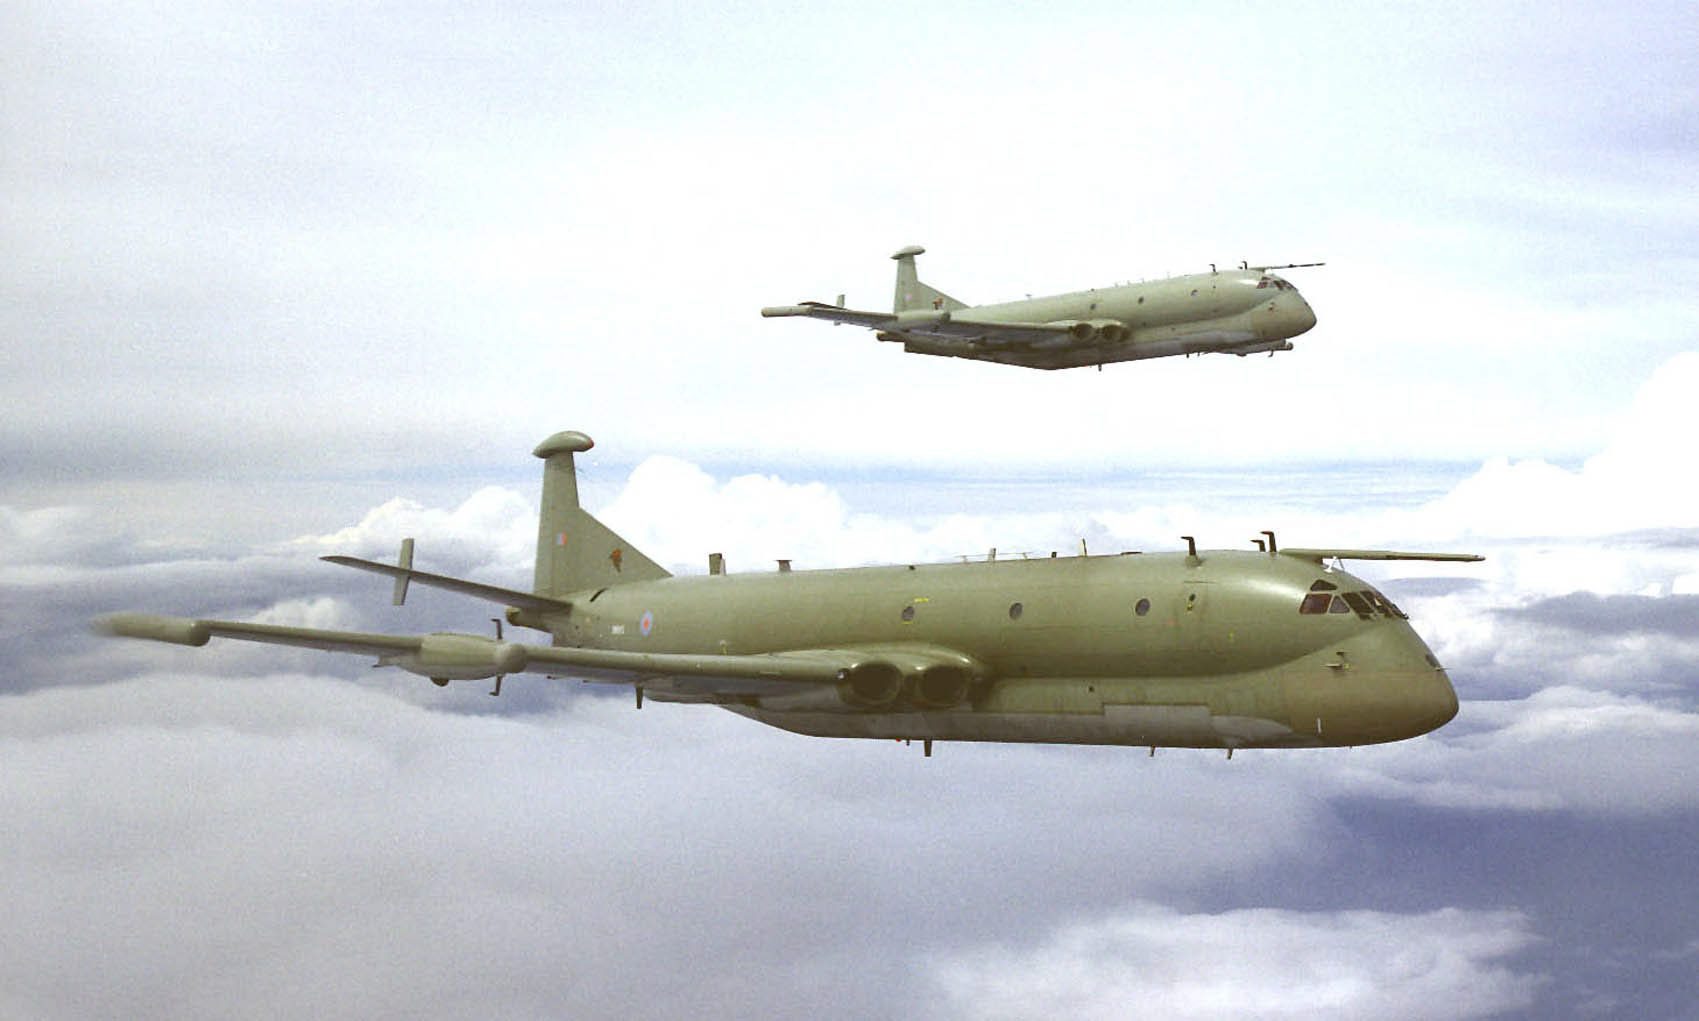 Two Nimrod R1s of 51 Squadron, based at RAF Waddington, pictured flying in formation when still wearing their "hemp" camouflage. XV249 is quite possibly pictured here. (photo via Wikipedia)